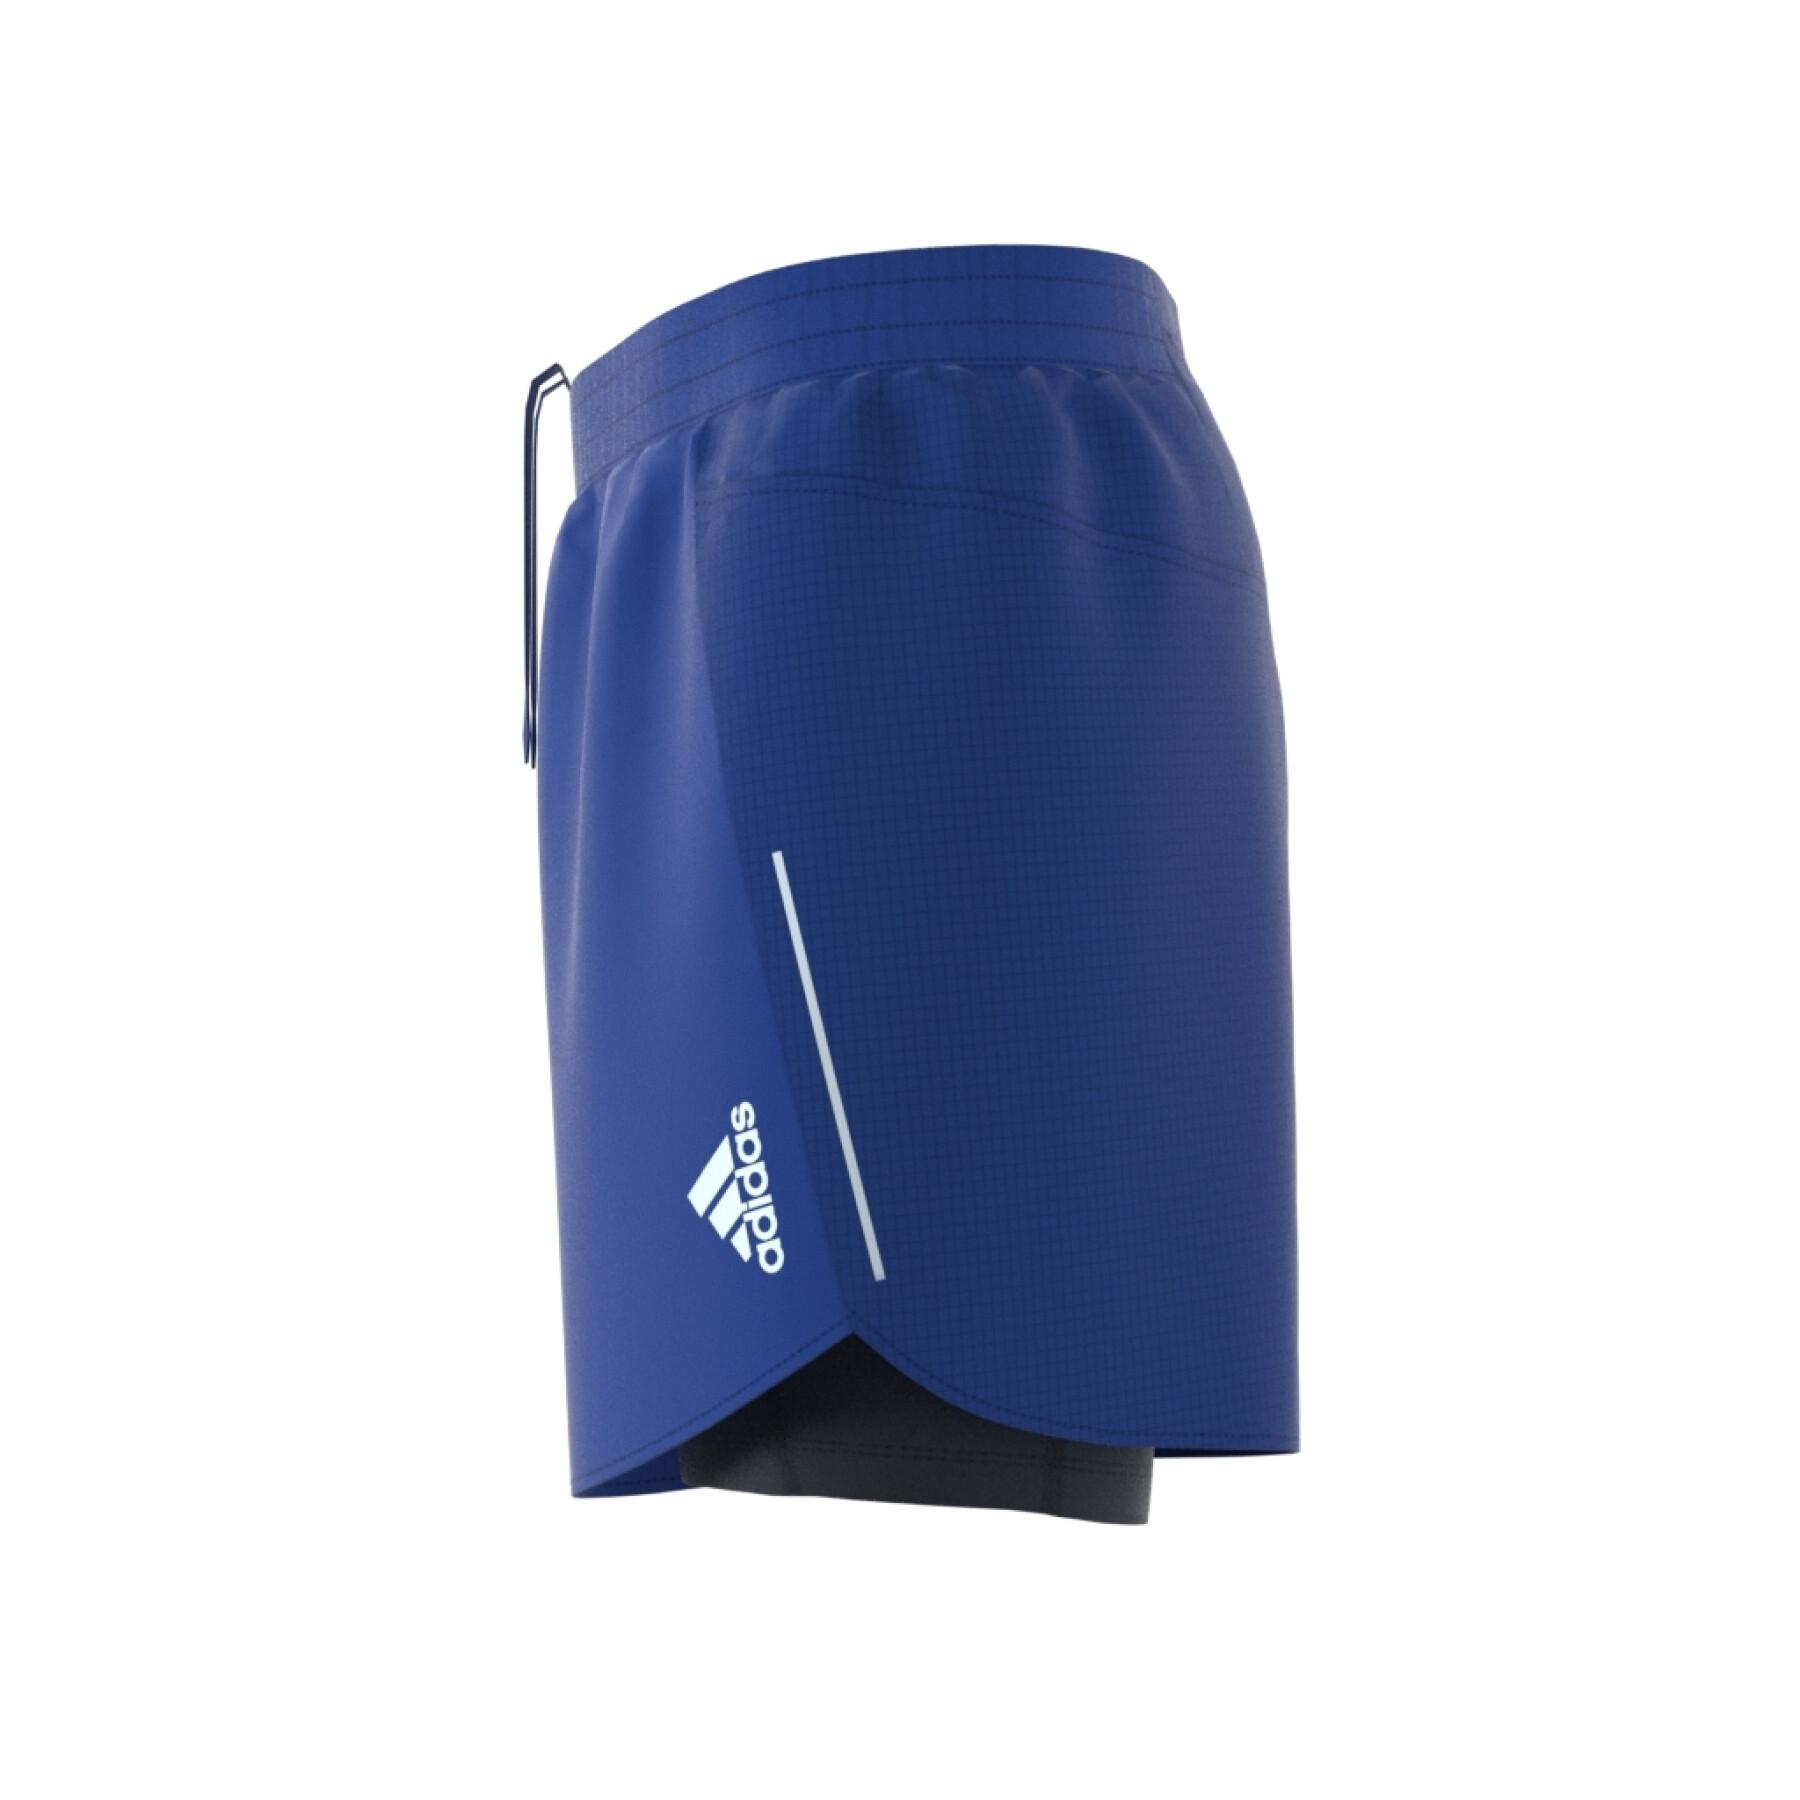 Two in one shorts designed for running adidas